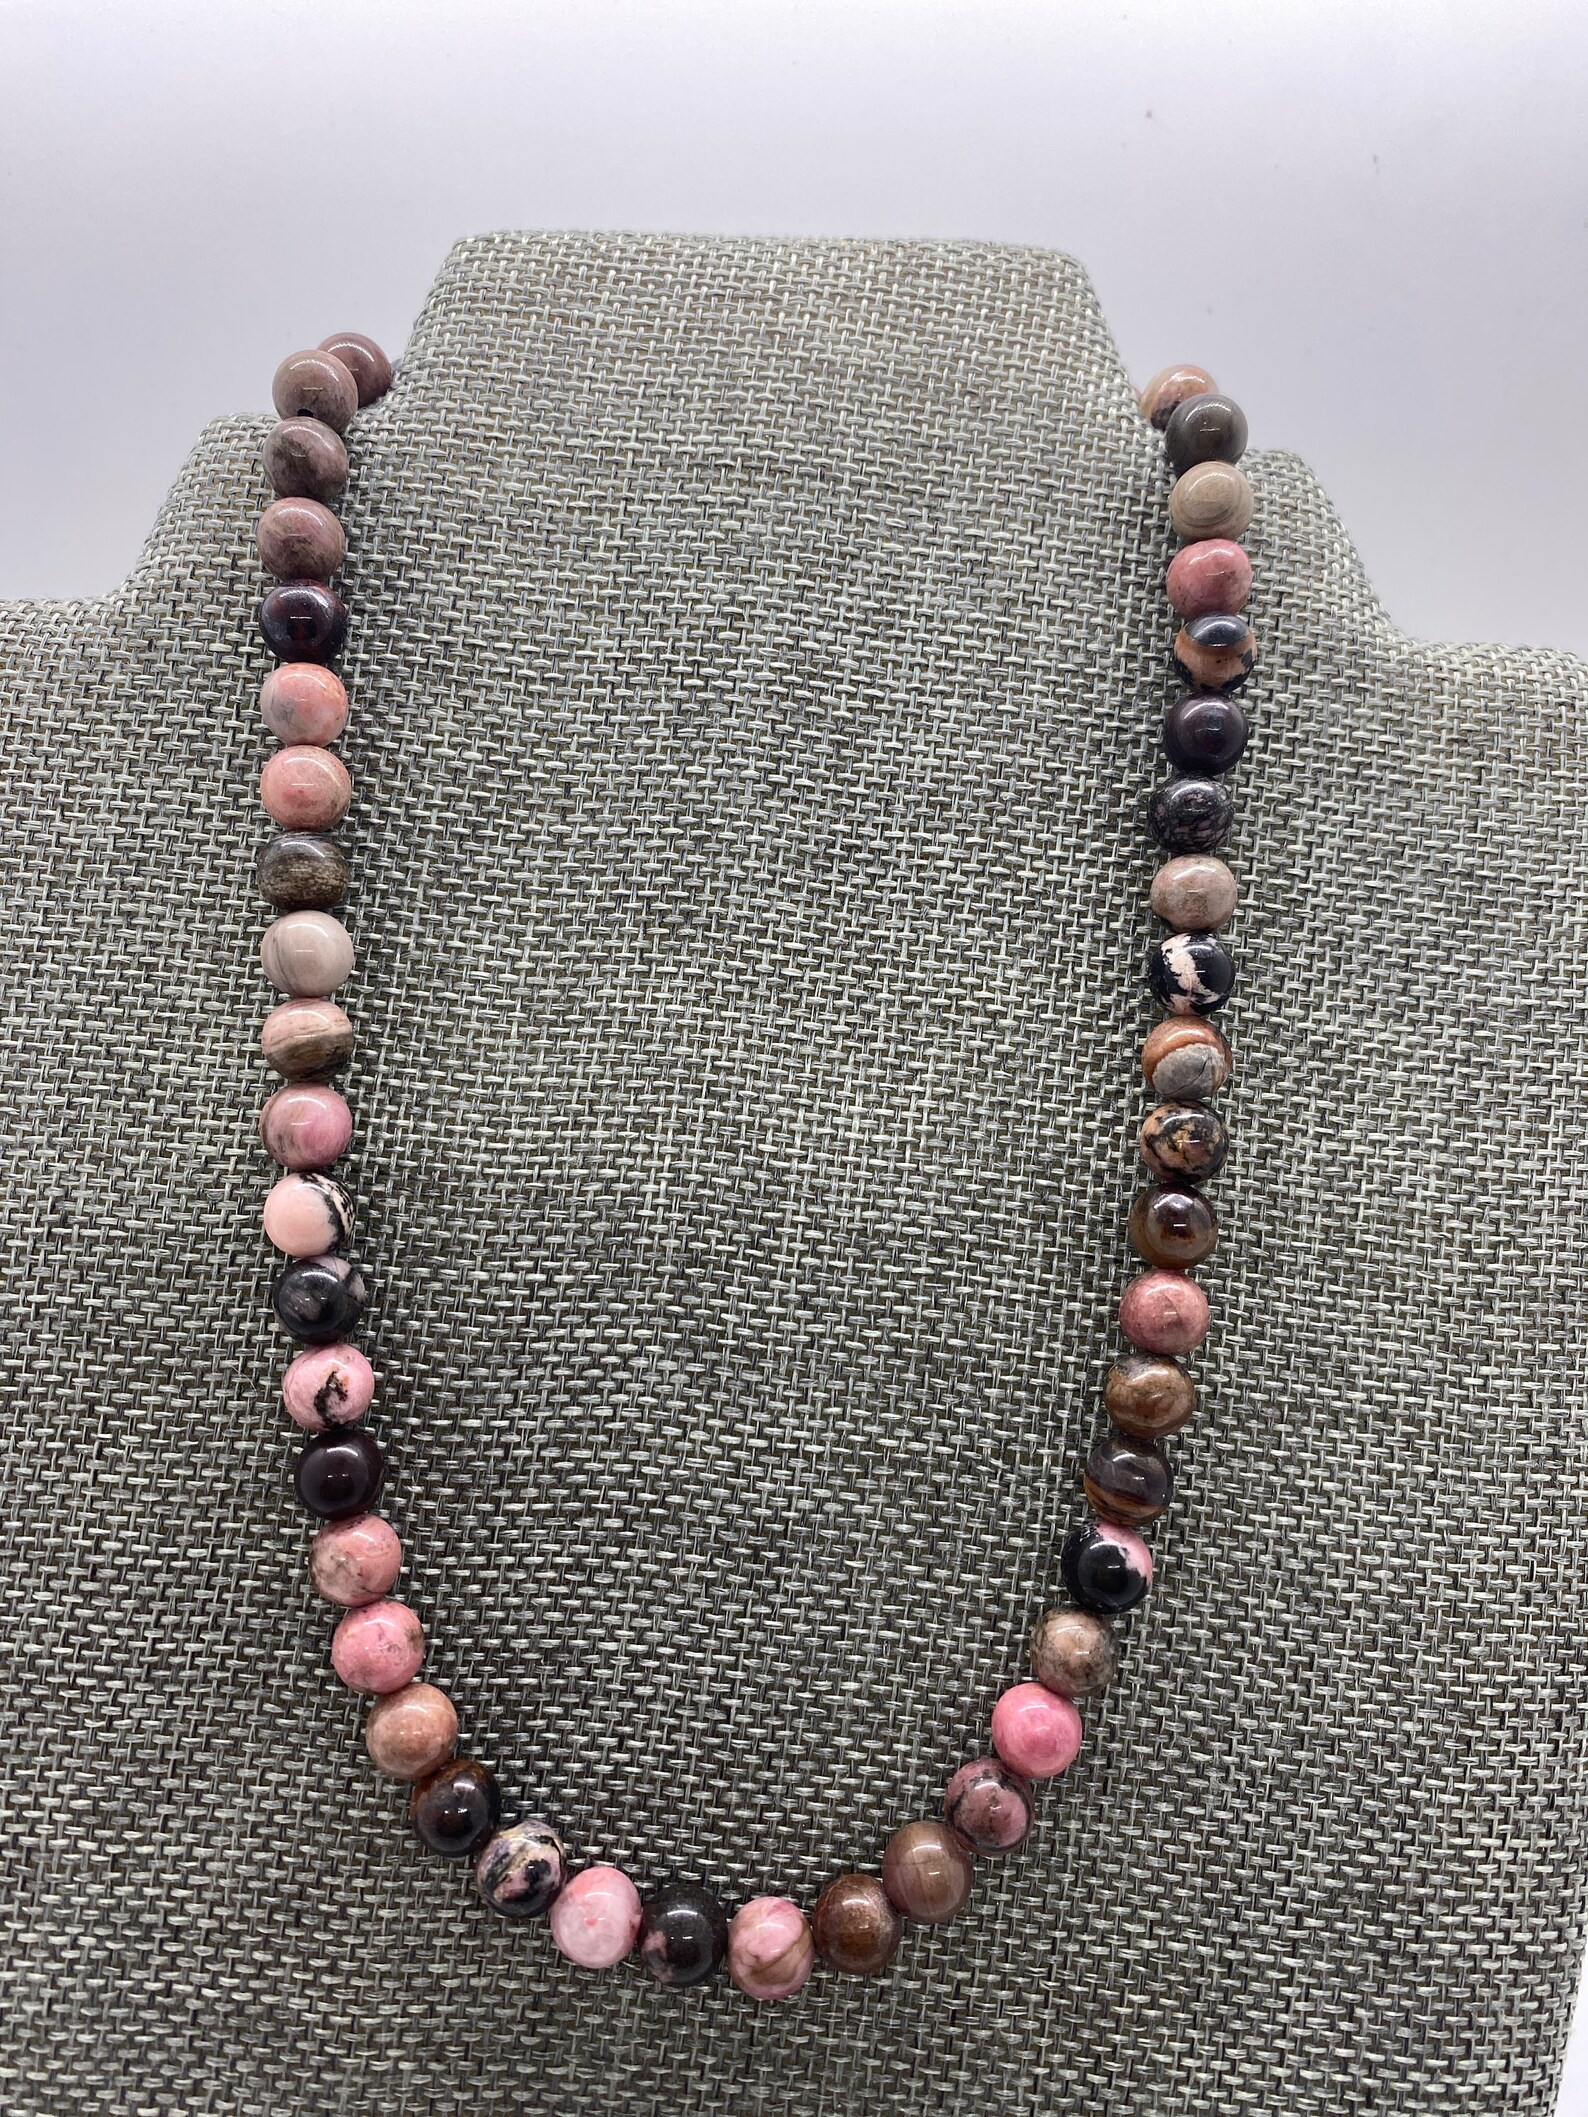 Rhodonite Crystal Necklace 8mm Beads Sterling Silver Clasp | Etsy